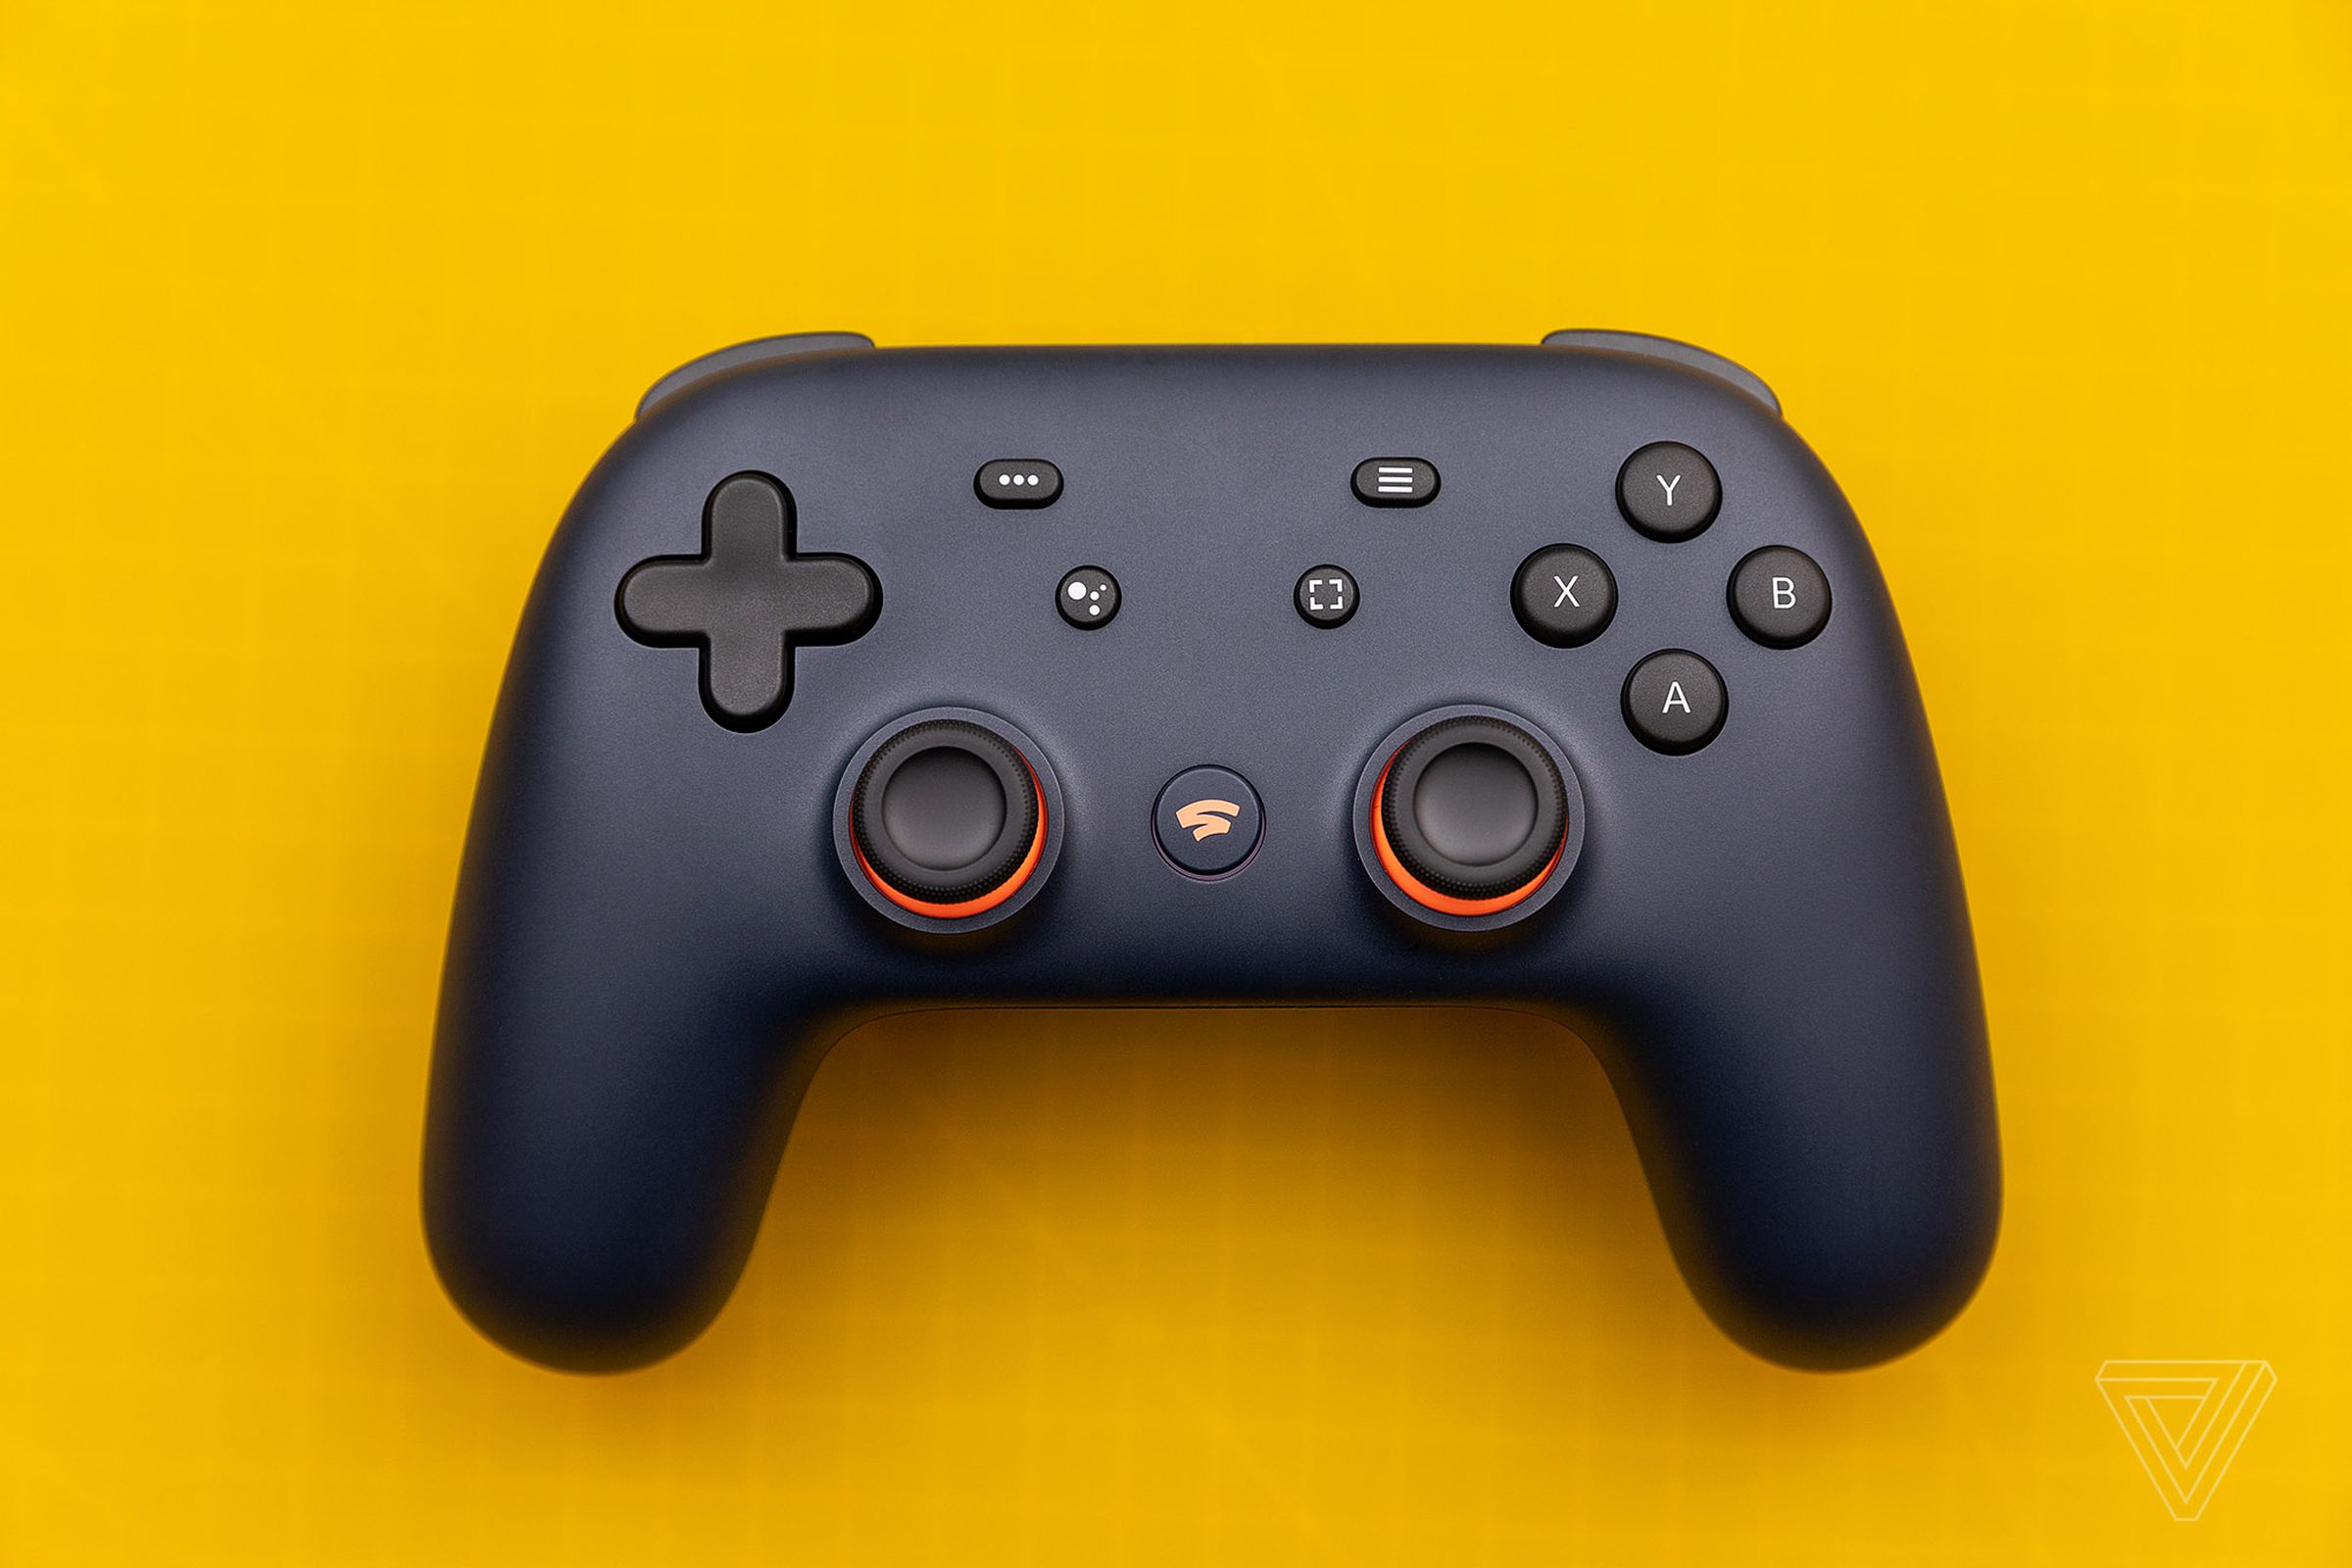 How to activate Bluetooth on your Stadia controller